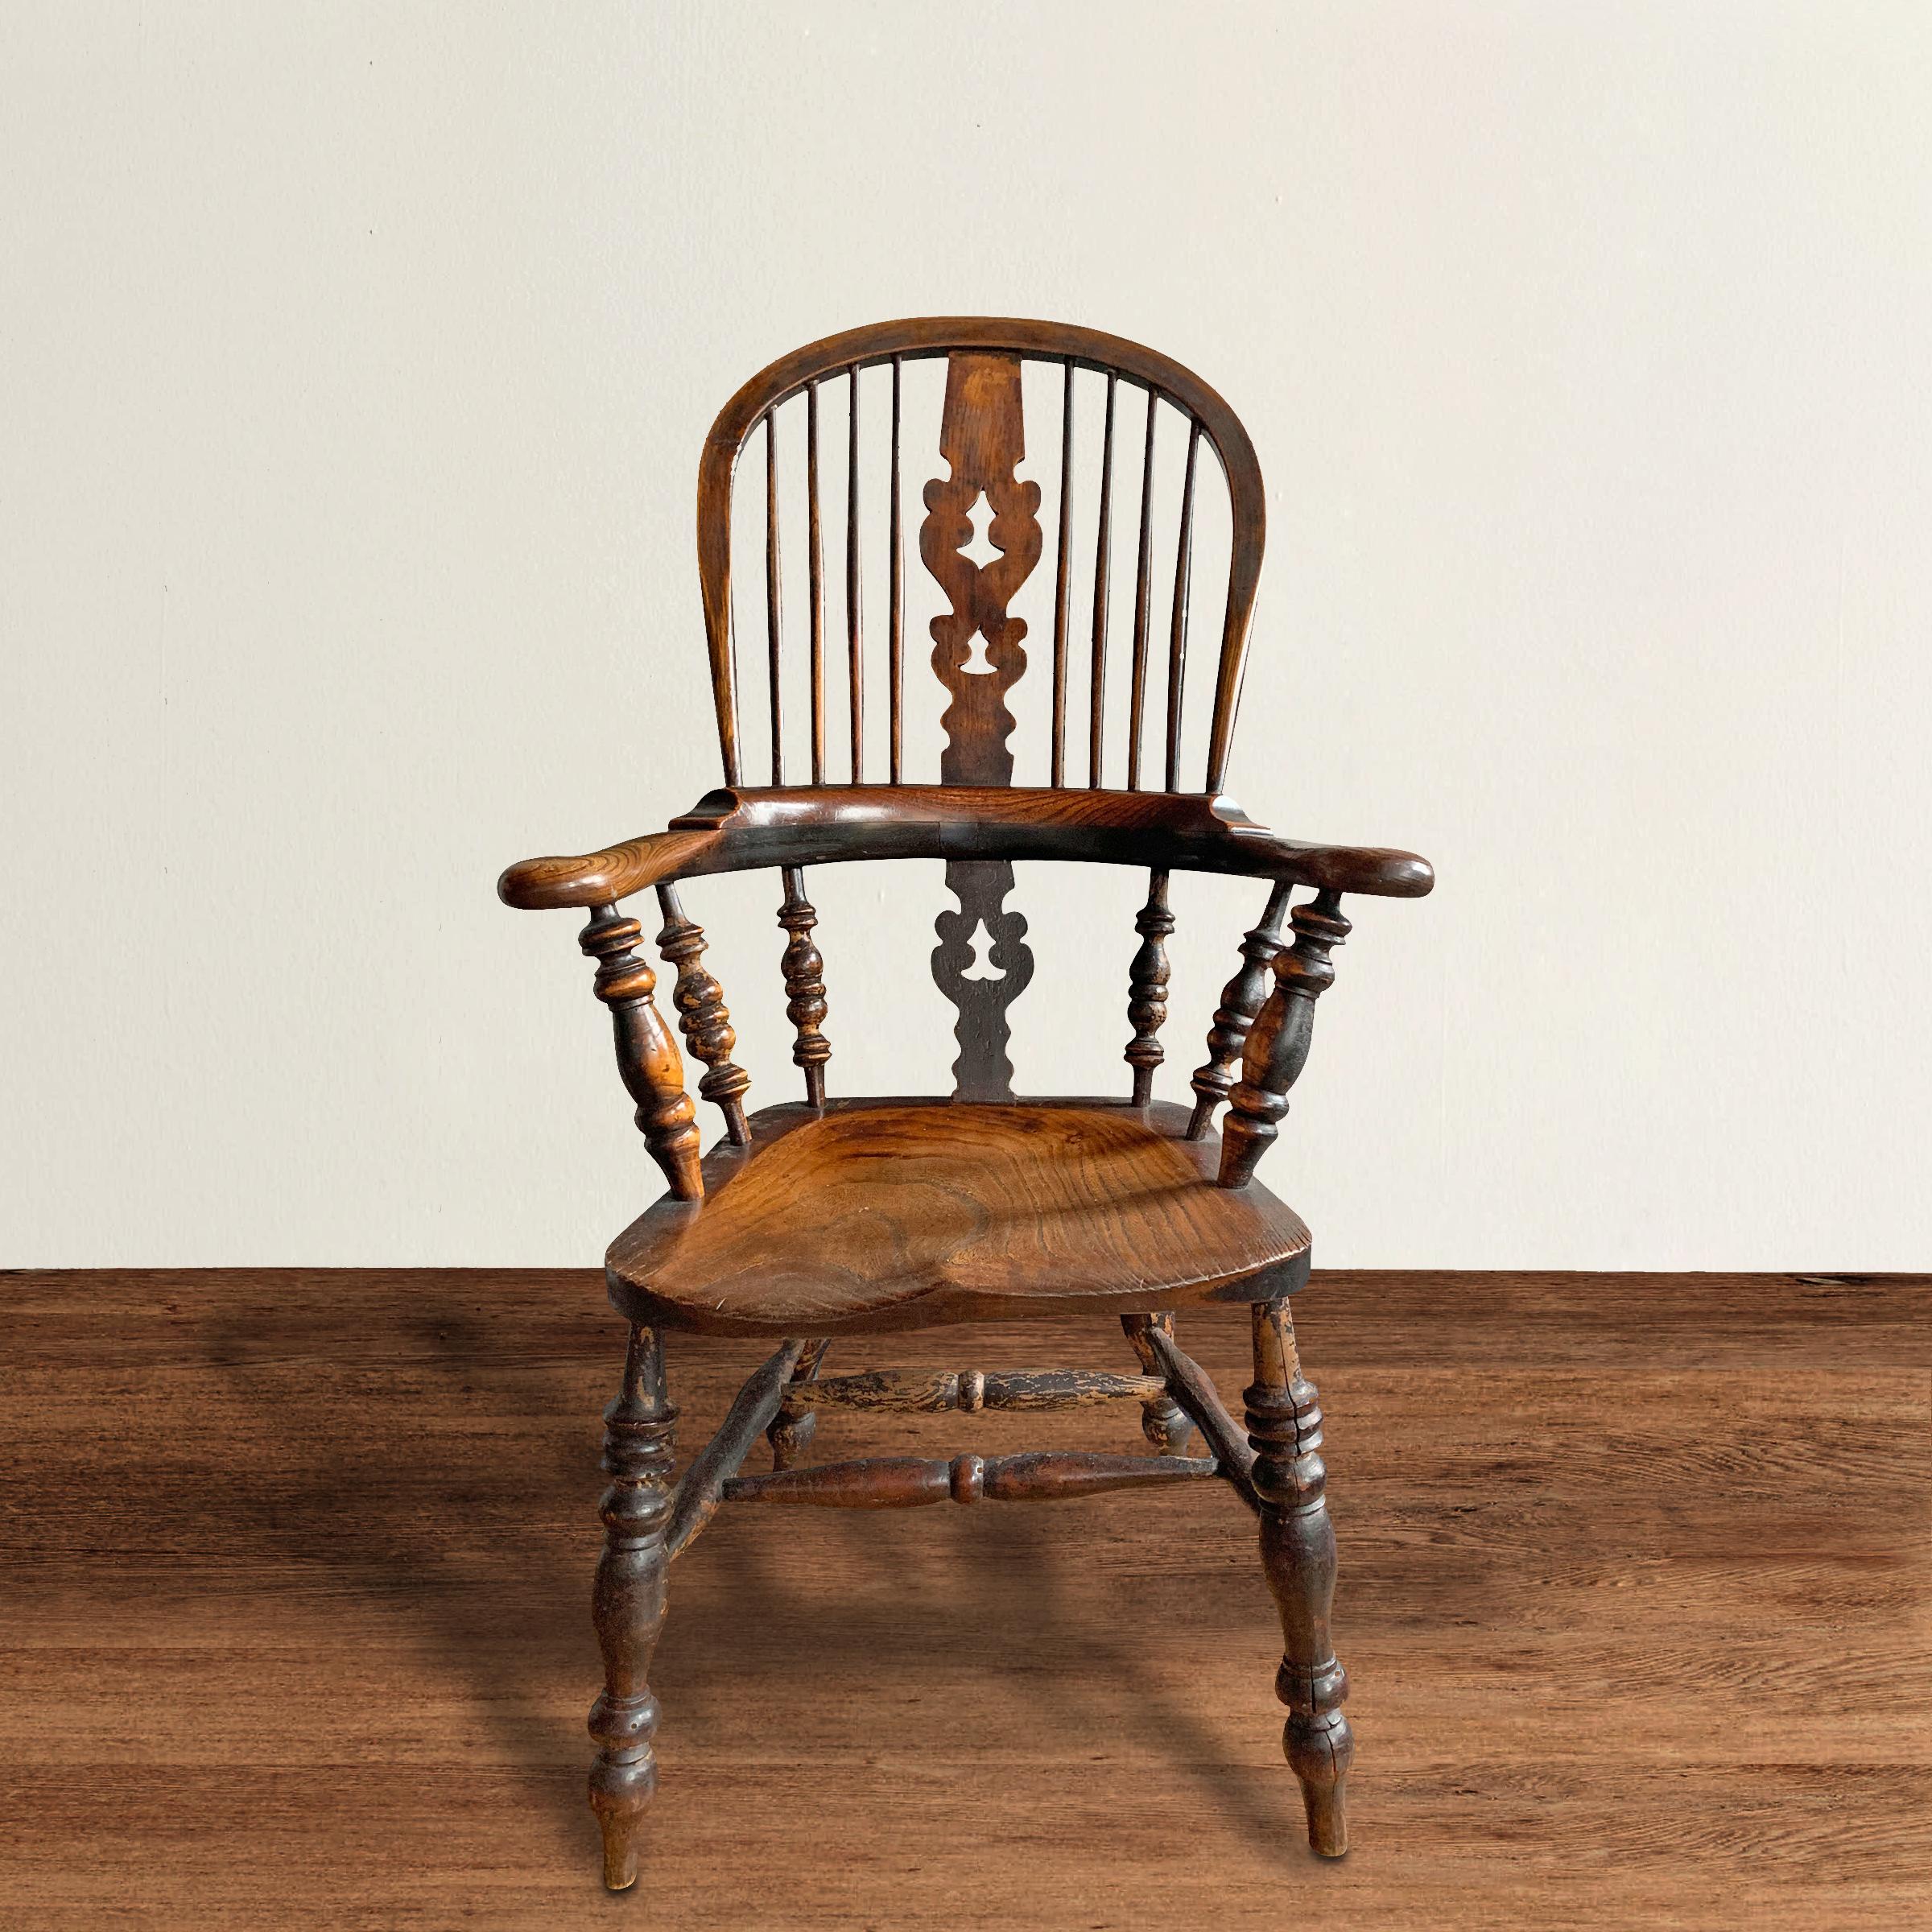 A fantastic mid-19th century English yew wood Windsor armchair with a tall bentwood hoop back, bentwood arms, many turned spindles and legs, a solid plank saddle seat, and a wonderful well-worn patina.